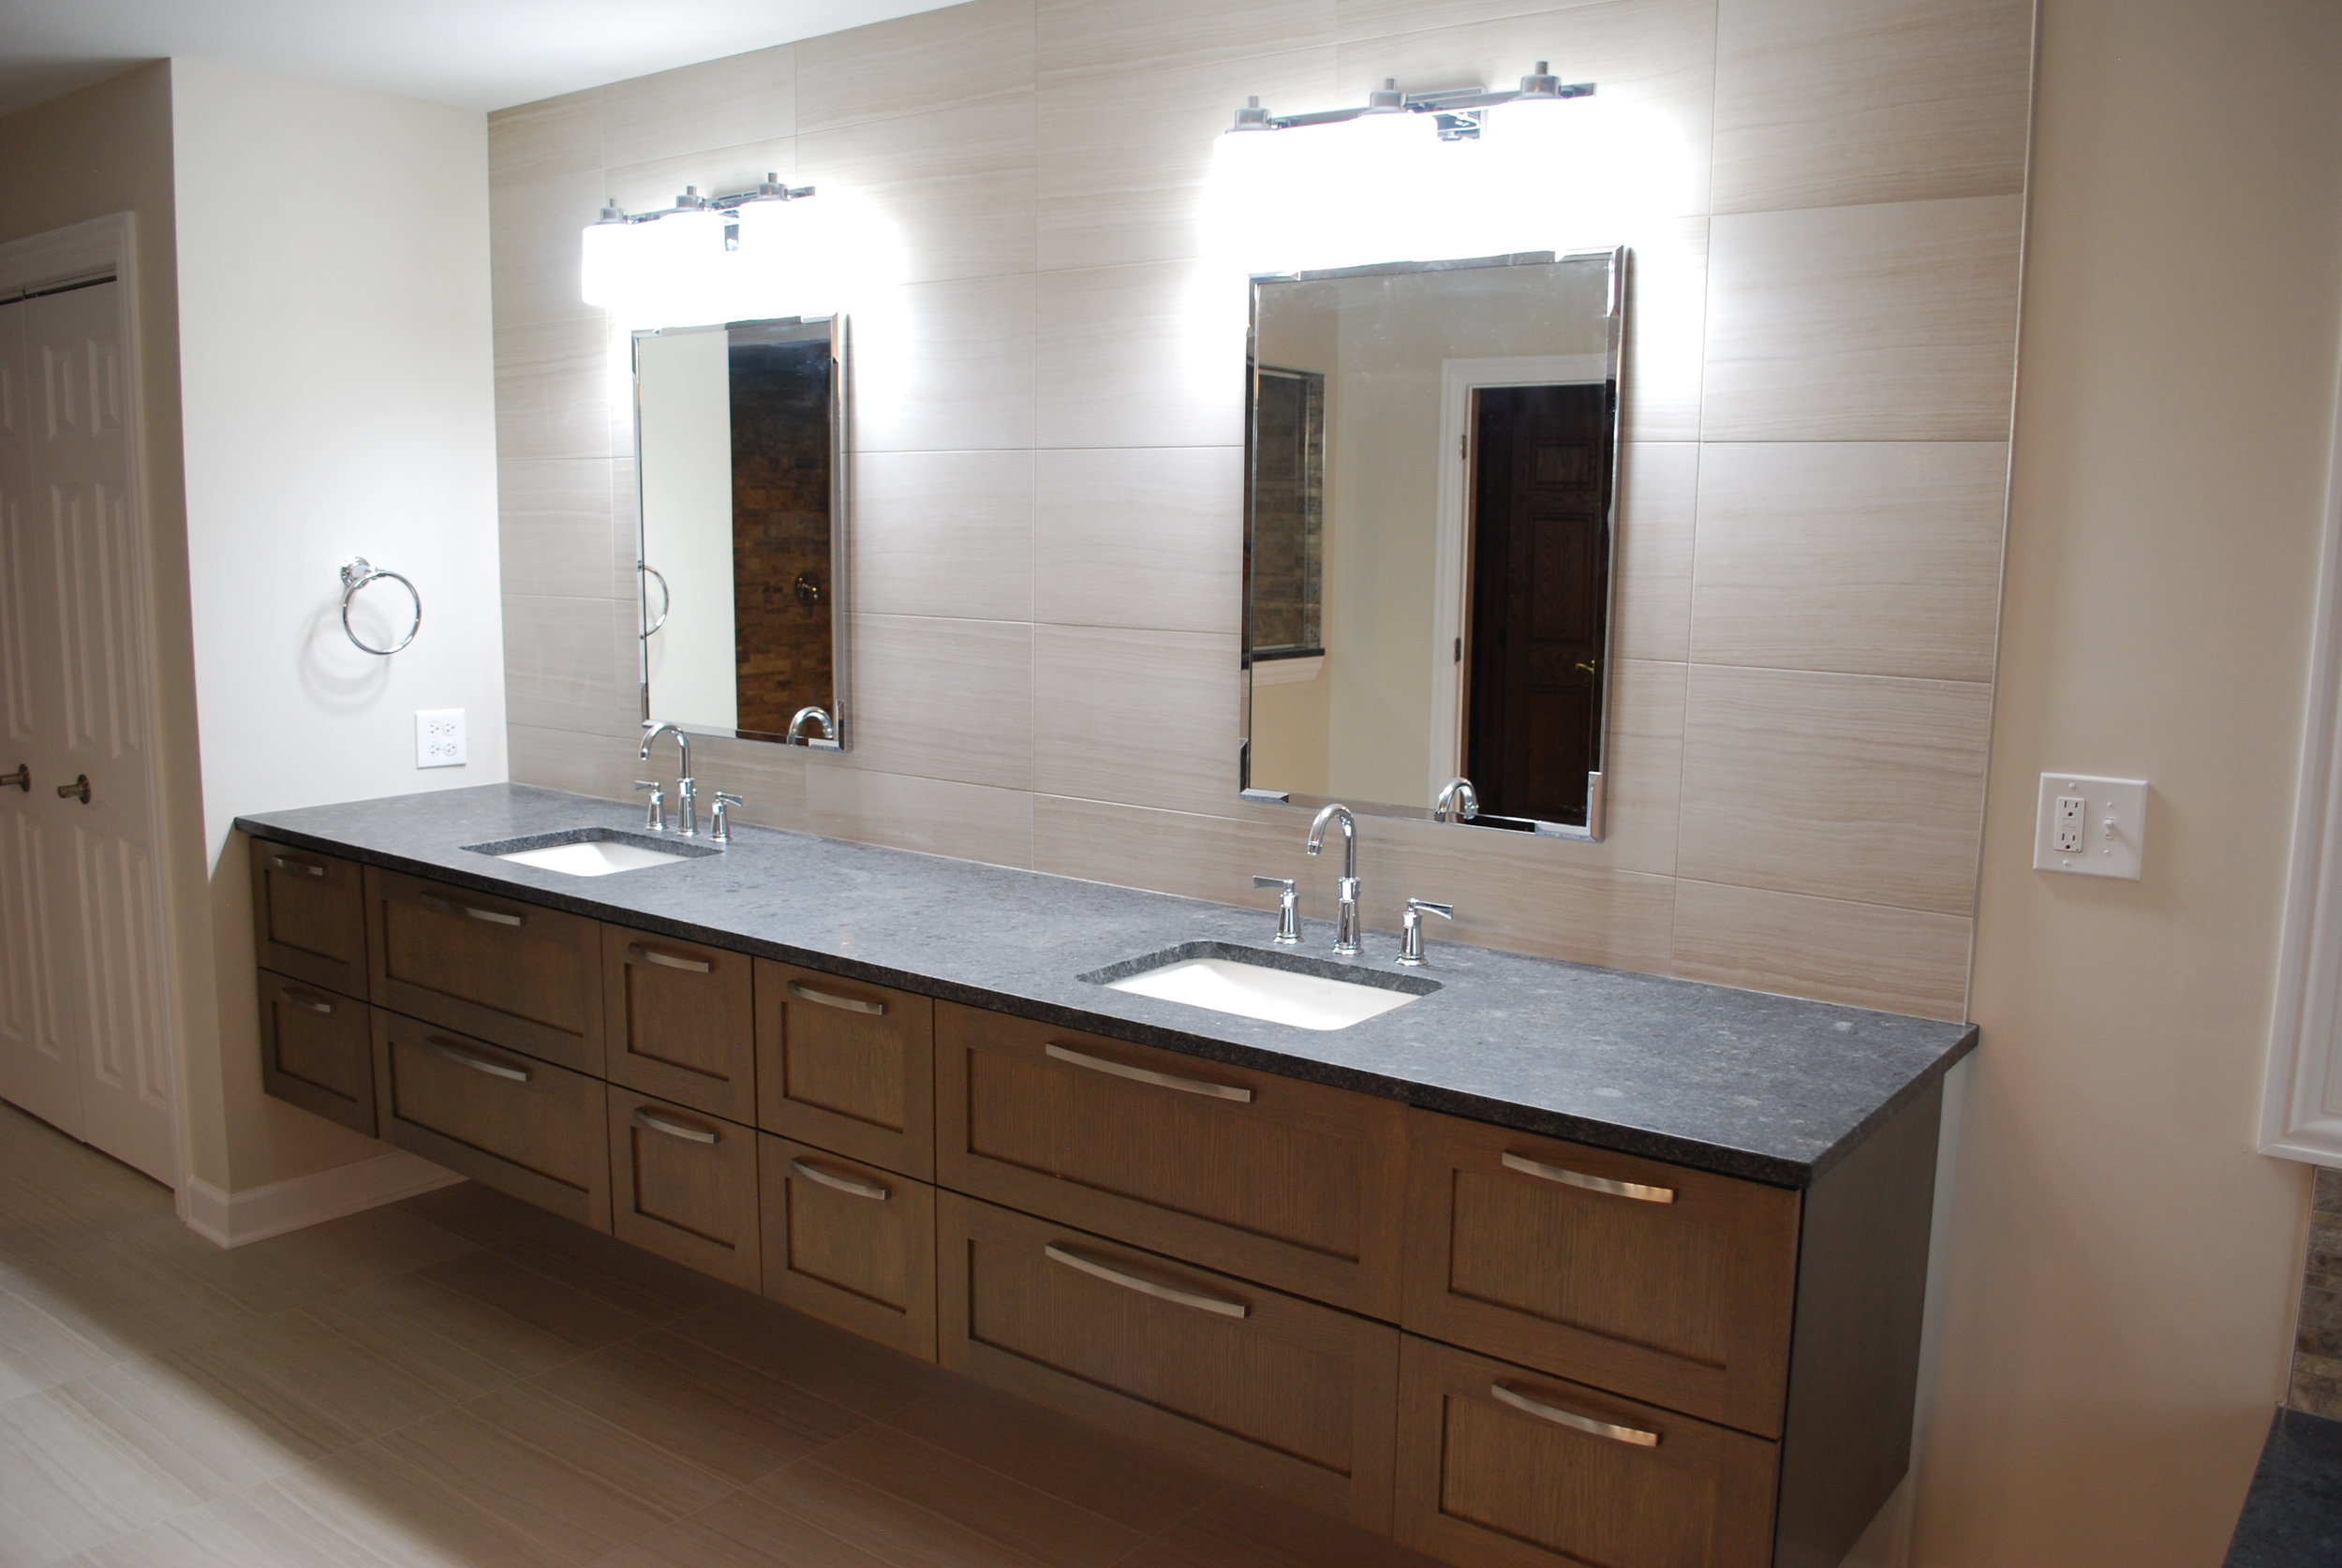 NAPERVILLE IL. BATHROOM VANITY REMODEL WITH FLOATING WALNUT CABINETRY 